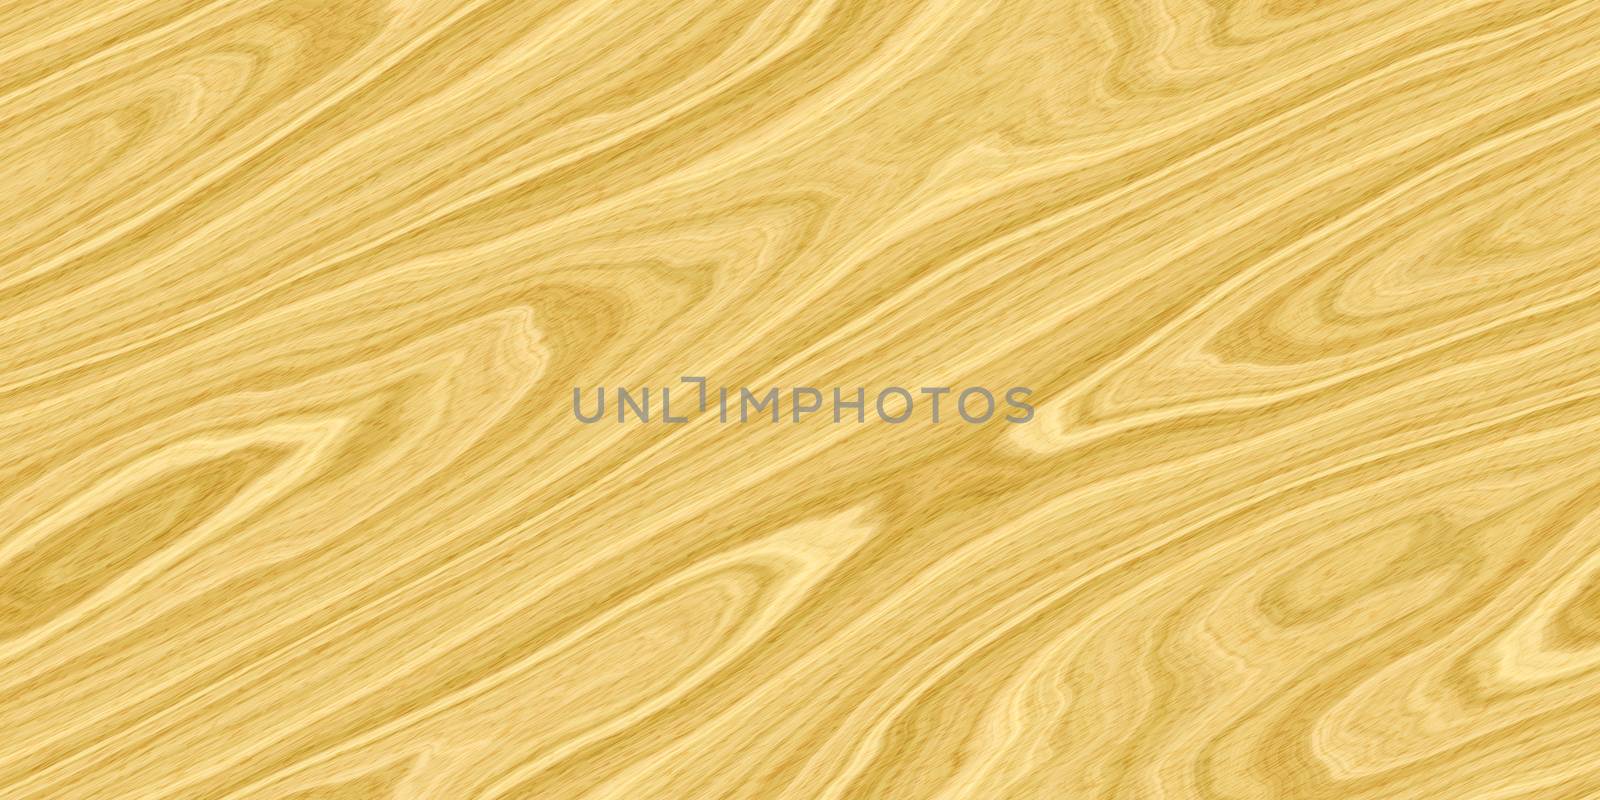 Ash wood surface seamless texture. Ash wooden board panel background. Thirty degrees isometric direction fibers projection